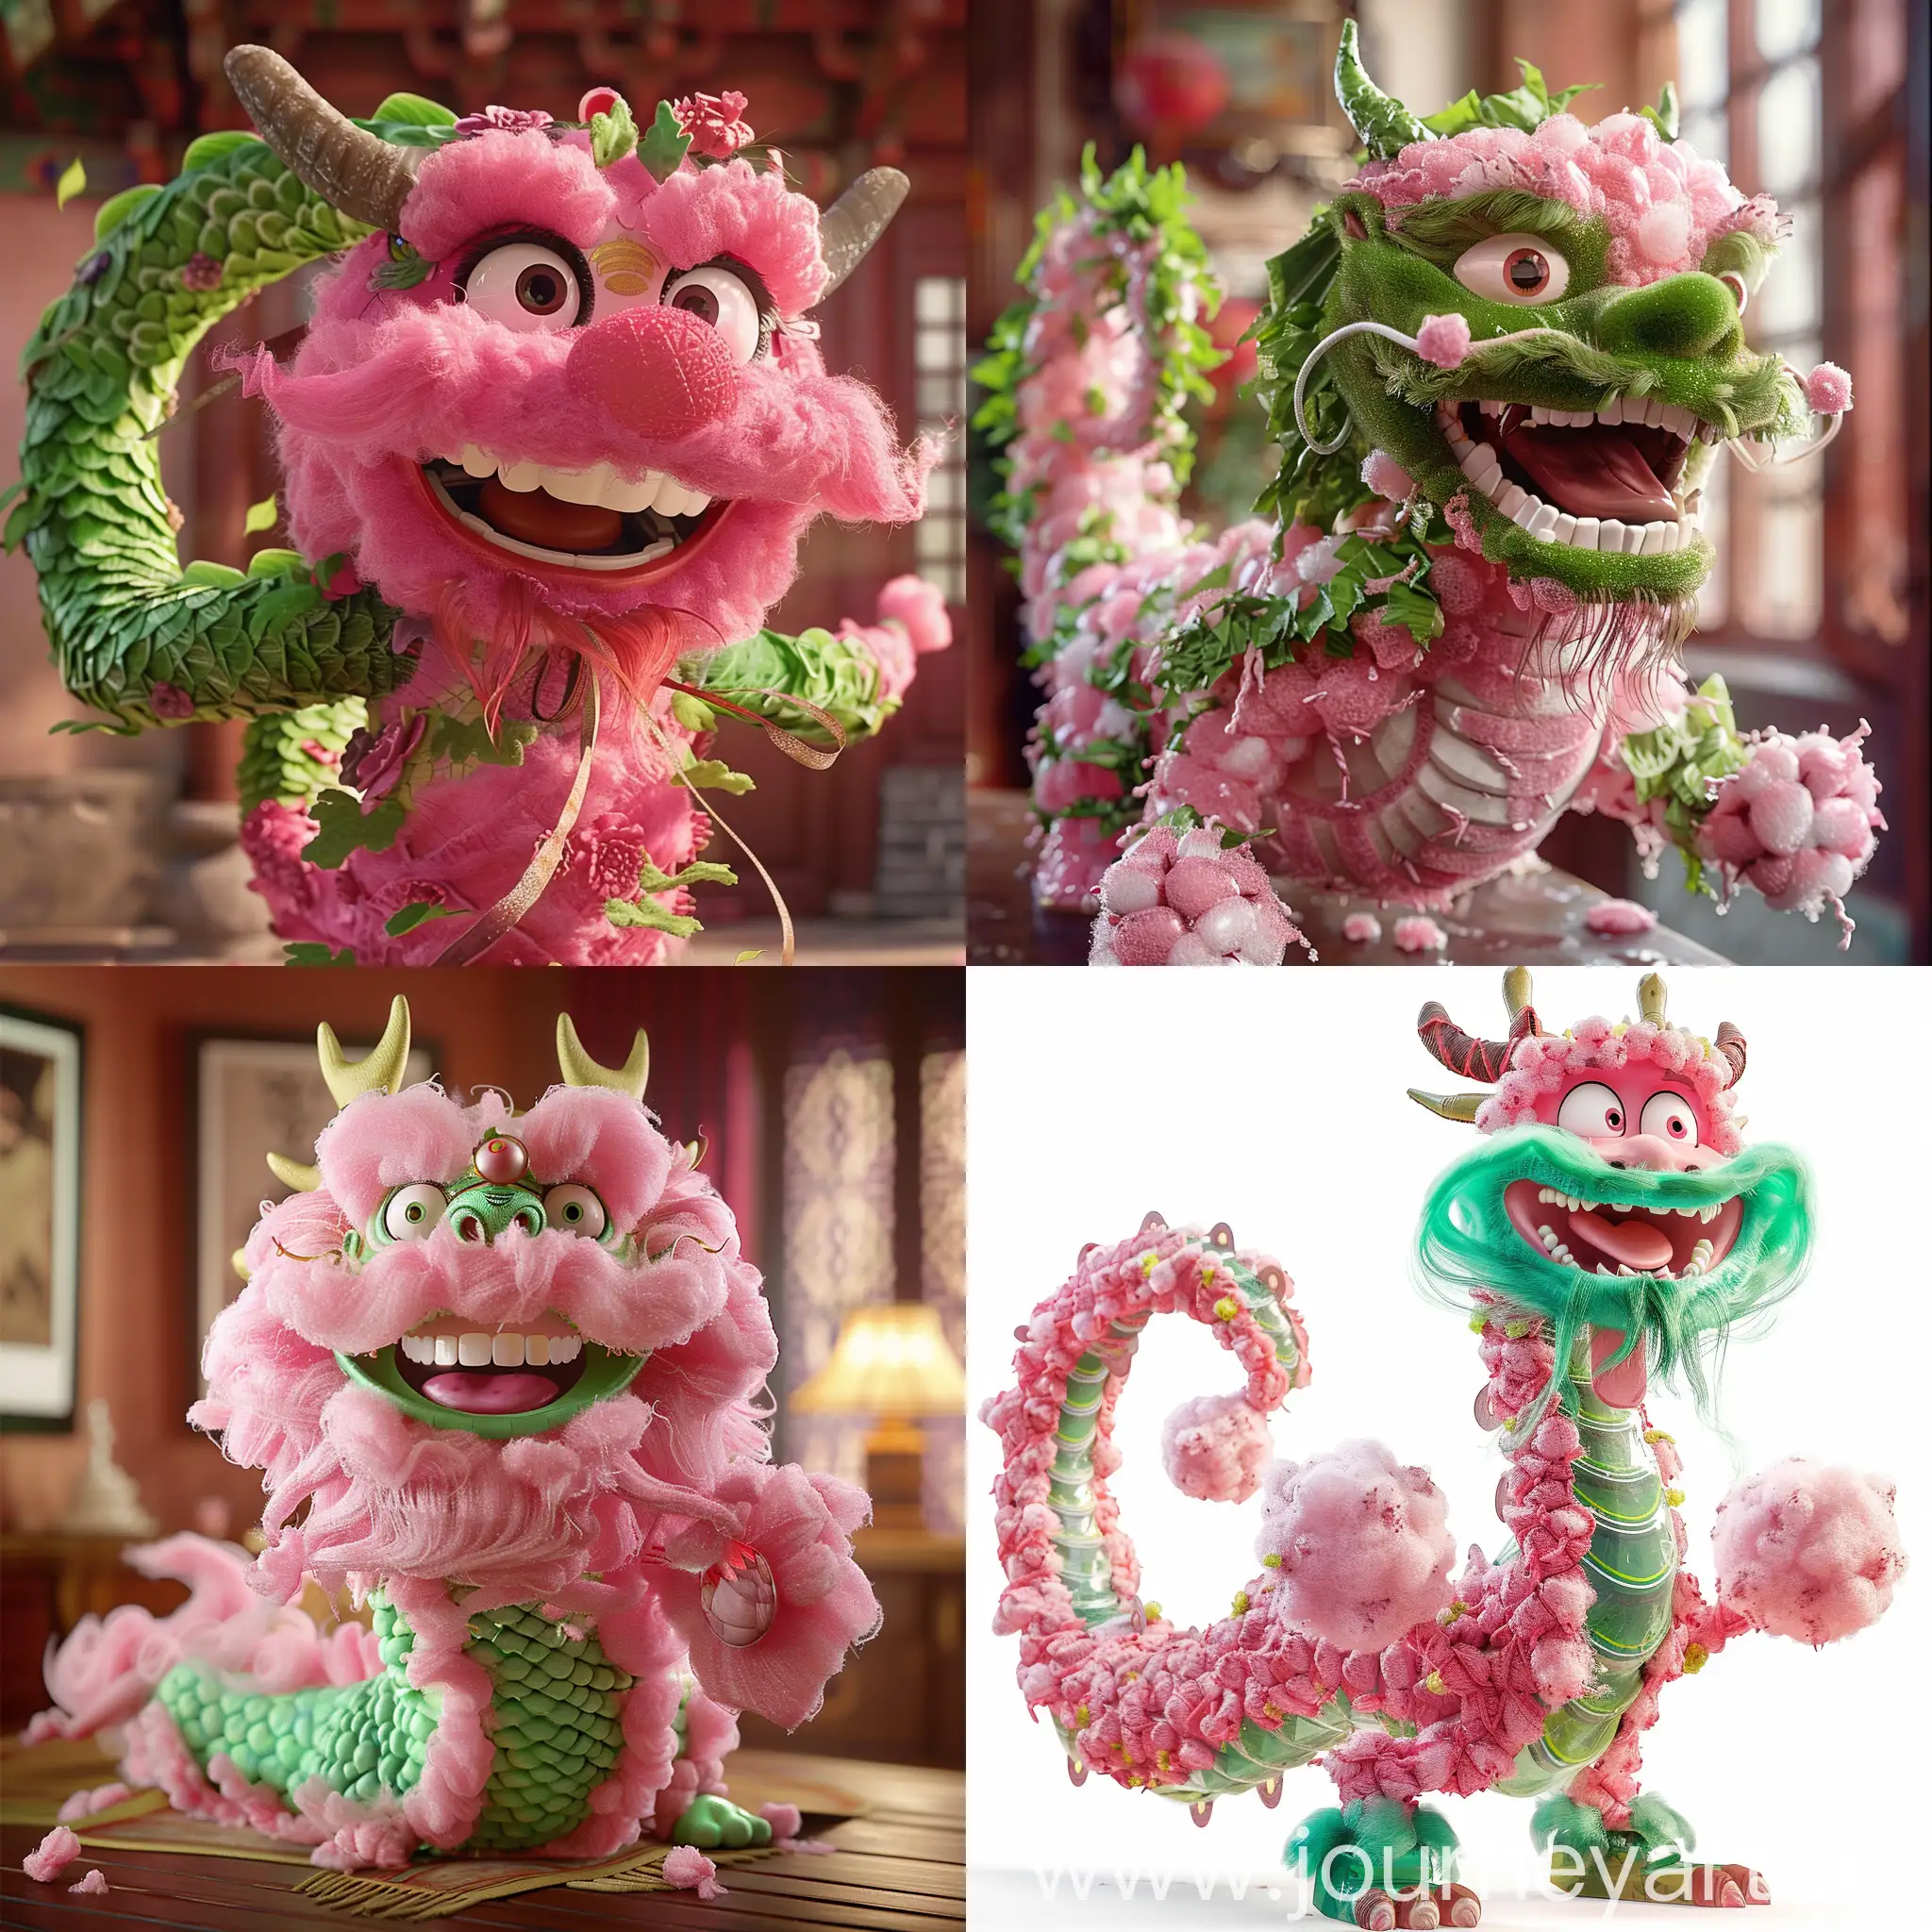  Pixar animation style, a pink green Chinese dragon, made of cotton candy material, with a happy expression